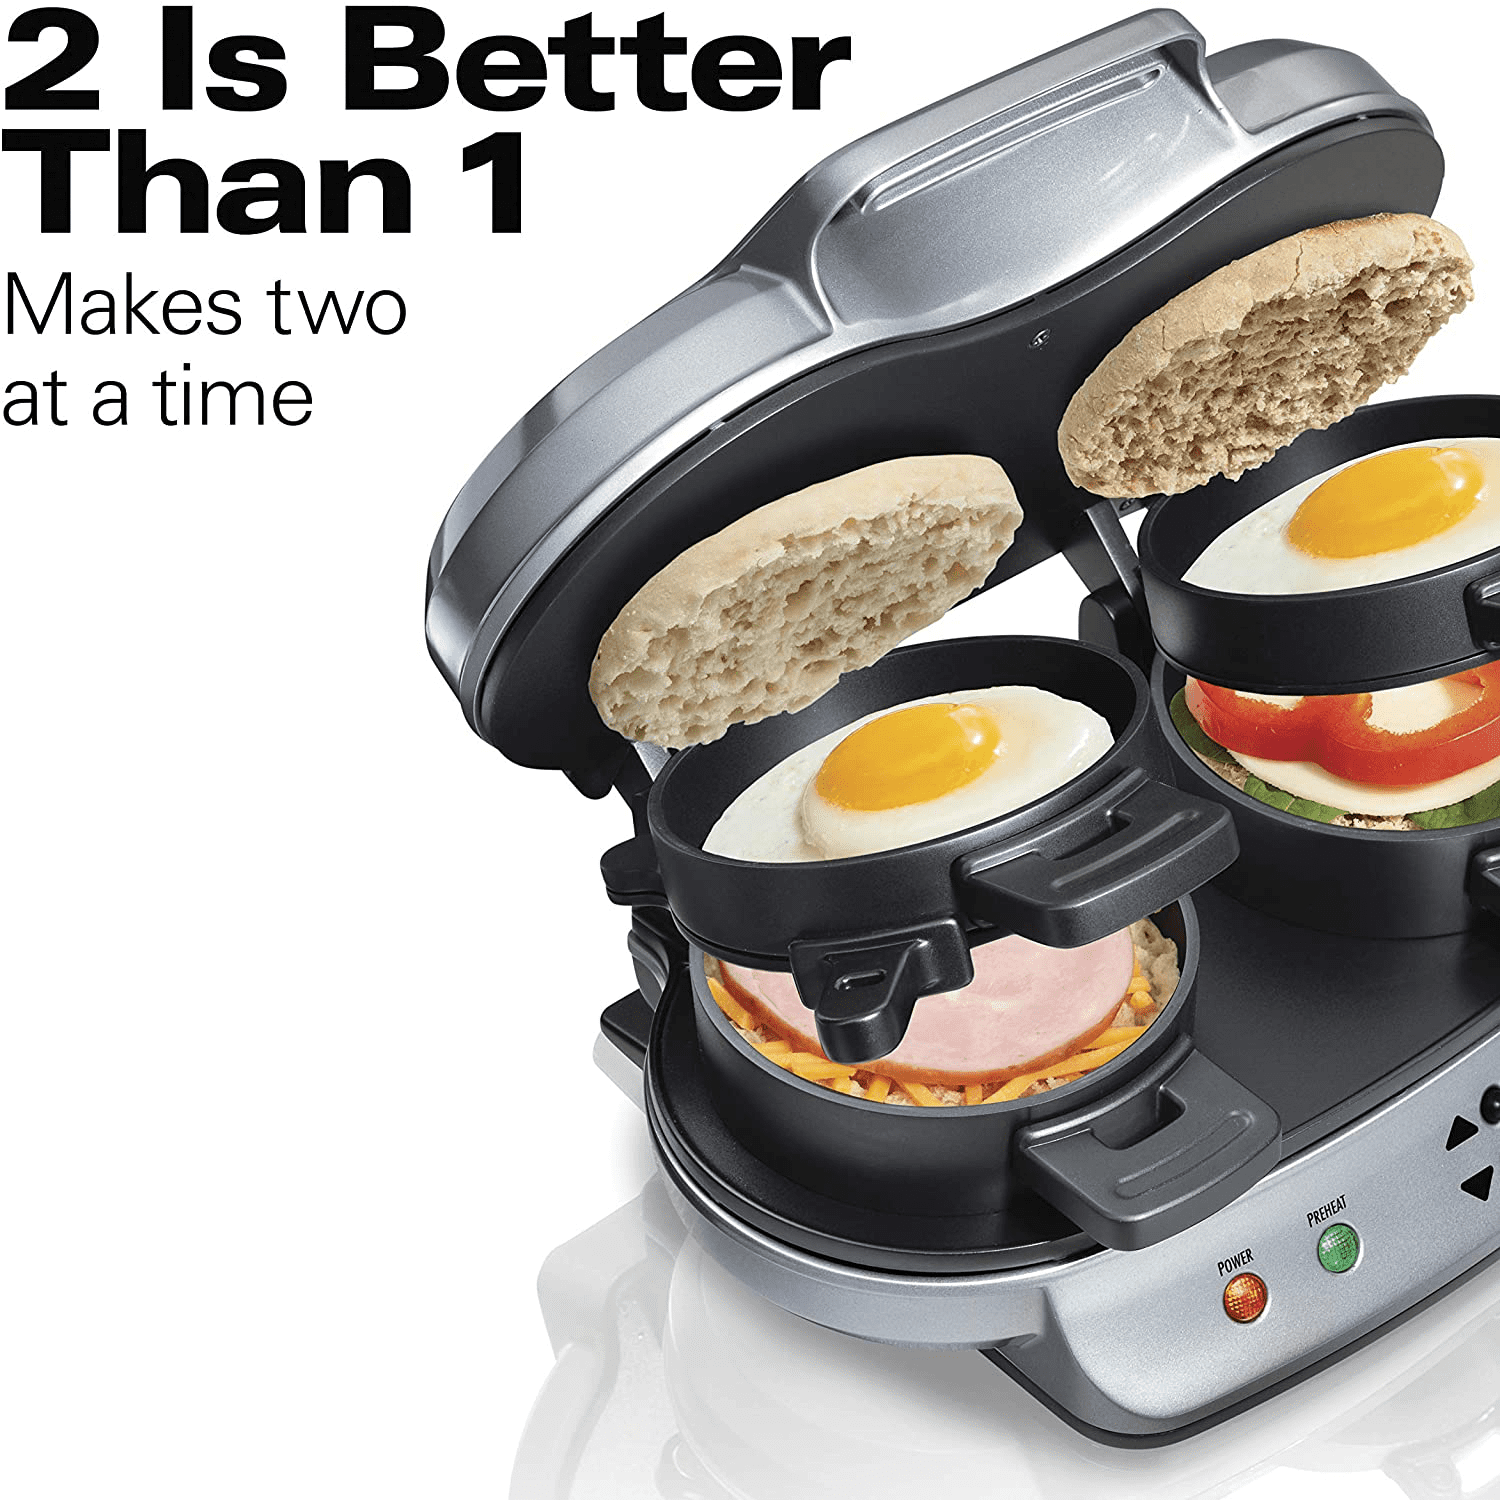 This is How we Breakfast featuring the Breakfast Sandwich Maker  Breakfast  sandwich maker, Hamilton beach breakfast sandwich maker recipes, Breakfast  sandwich maker recipes